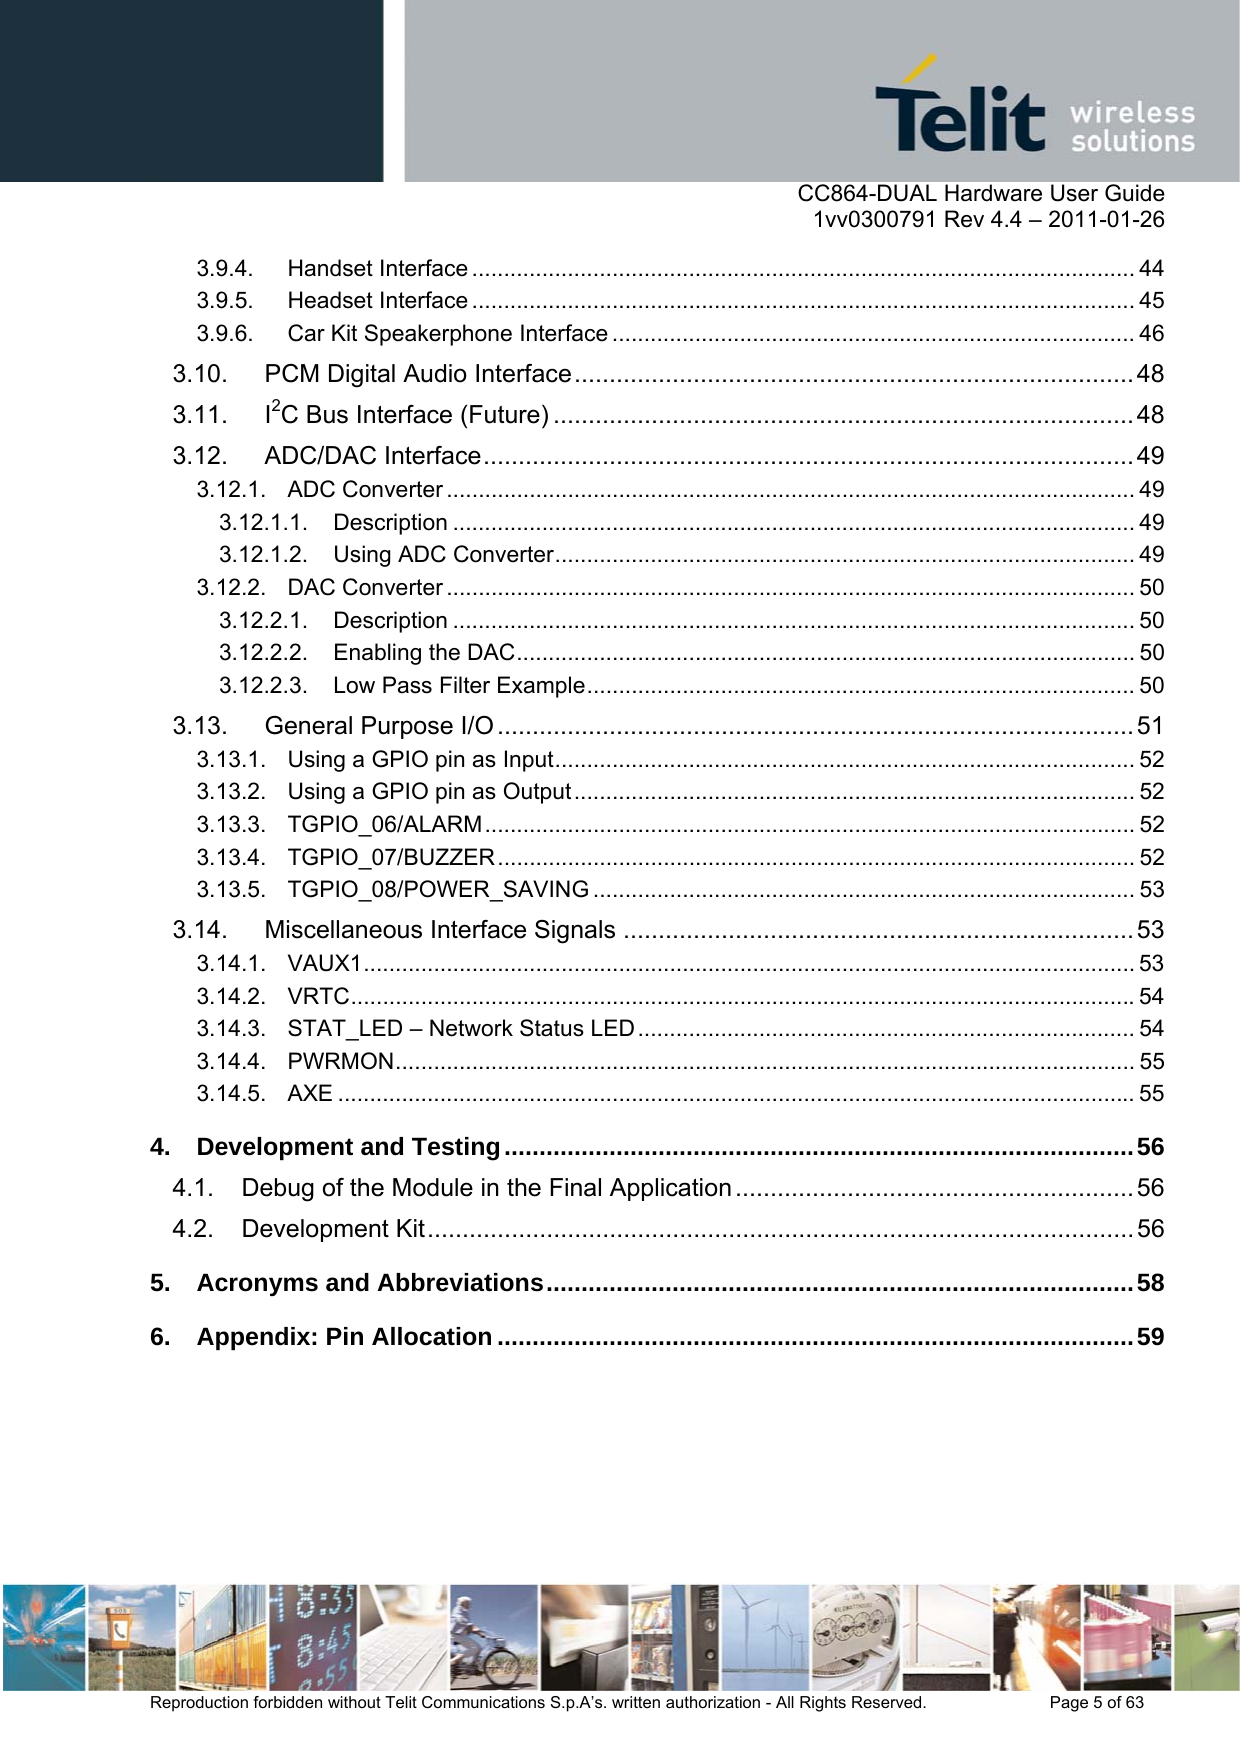      CC864-DUAL Hardware User Guide    1vv0300791 Rev 4.4 – 2011-01-26  Reproduction forbidden without Telit Communications S.p.A’s. written authorization - All Rights Reserved.    Page 5 of 63  3.9.4. Handset Interface ........................................................................................................ 44 3.9.5. Headset Interface ........................................................................................................ 45 3.9.6. Car Kit Speakerphone Interface .................................................................................. 46 3.10. PCM Digital Audio Interface ................................................................................ 48 3.11. I2C Bus Interface (Future) ................................................................................... 48 3.12. ADC/DAC Interface .............................................................................................  49 3.12.1. ADC Converter ............................................................................................................ 49 3.12.1.1. Description ........................................................................................................... 49 3.12.1.2. Using ADC Converter ........................................................................................... 49 3.12.2. DAC Converter ............................................................................................................ 50 3.12.2.1. Description ........................................................................................................... 50 3.12.2.2. Enabling the DAC ................................................................................................. 50 3.12.2.3. Low Pass Filter Example ...................................................................................... 50 3.13. General Purpose I/O ........................................................................................... 51 3.13.1. Using a GPIO pin as Input ........................................................................................... 52 3.13.2. Using a GPIO pin as Output ........................................................................................ 52 3.13.3. TGPIO_06/ALARM ......................................................................................................  52 3.13.4. TGPIO_07/BUZZER ....................................................................................................  52 3.13.5. TGPIO_08/POWER_SAVING ..................................................................................... 53 3.14. Miscellaneous Interface Signals ......................................................................... 53 3.14.1. VAUX1 ......................................................................................................................... 53 3.14.2. VRTC ........................................................................................................................... 54 3.14.3. STAT_LED – Network Status LED .............................................................................. 54 3.14.4. PWRMON ....................................................................................................................  55 3.14.5. AXE ............................................................................................................................. 55 4. Development and Testing .......................................................................................... 56 4.1. Debug of the Module in the Final Application ......................................................... 56 4.2. Development Kit ..................................................................................................... 56 5. Acronyms and Abbreviations .................................................................................... 58 6. Appendix: Pin Allocation ........................................................................................... 59  